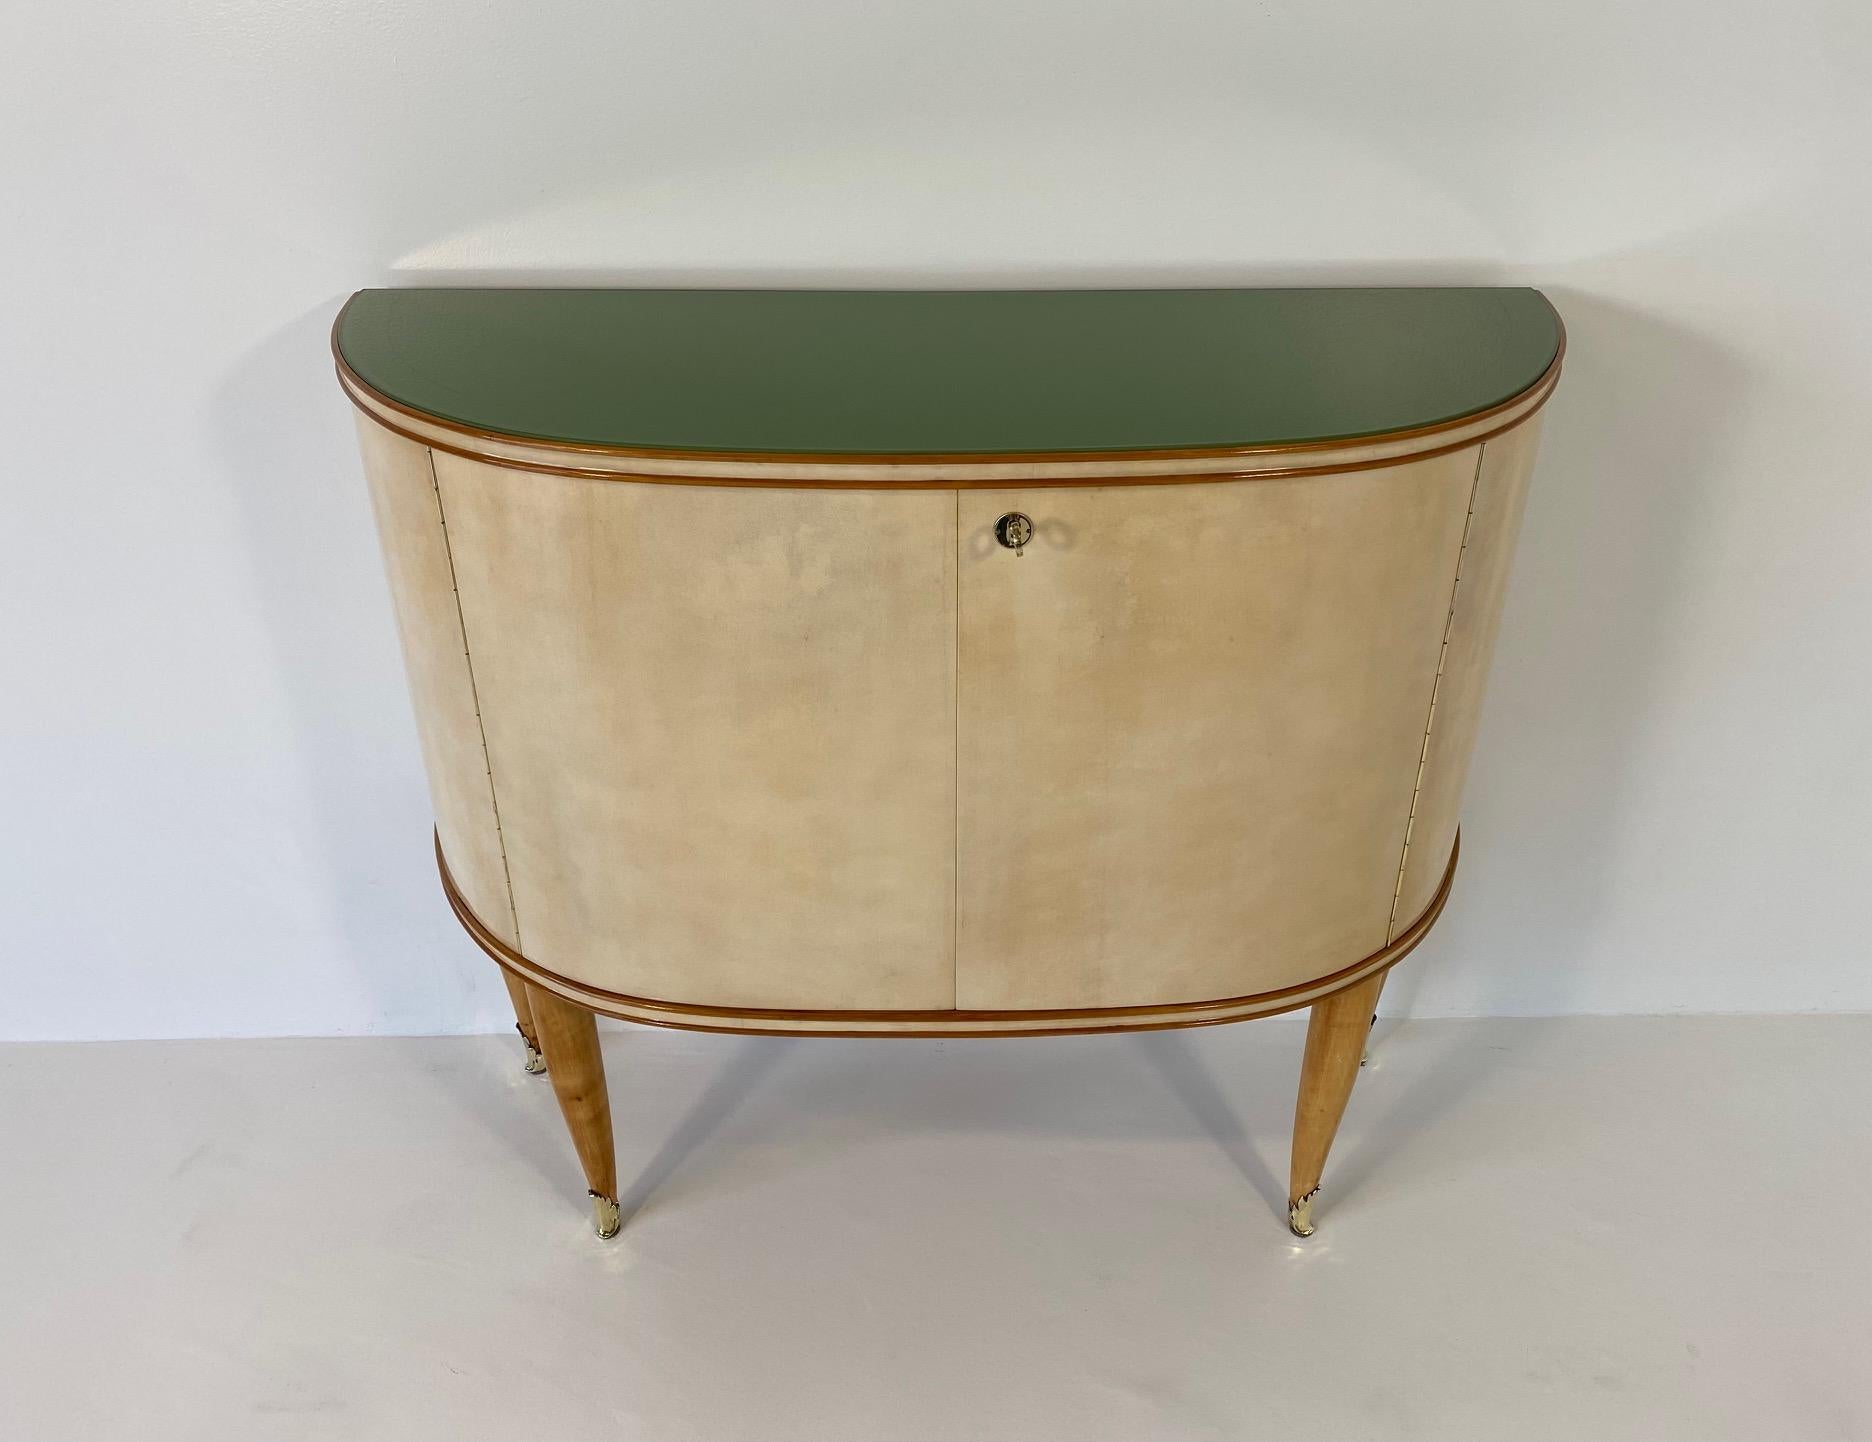 This Art Deco sideboard was produced in Italy in the 1950s, for the exposition ' La Permanente Mobili Cantù'. Cantù is a small village in the north of Italy, that used to be known for wood crafting and great furniture making.

The doors and the